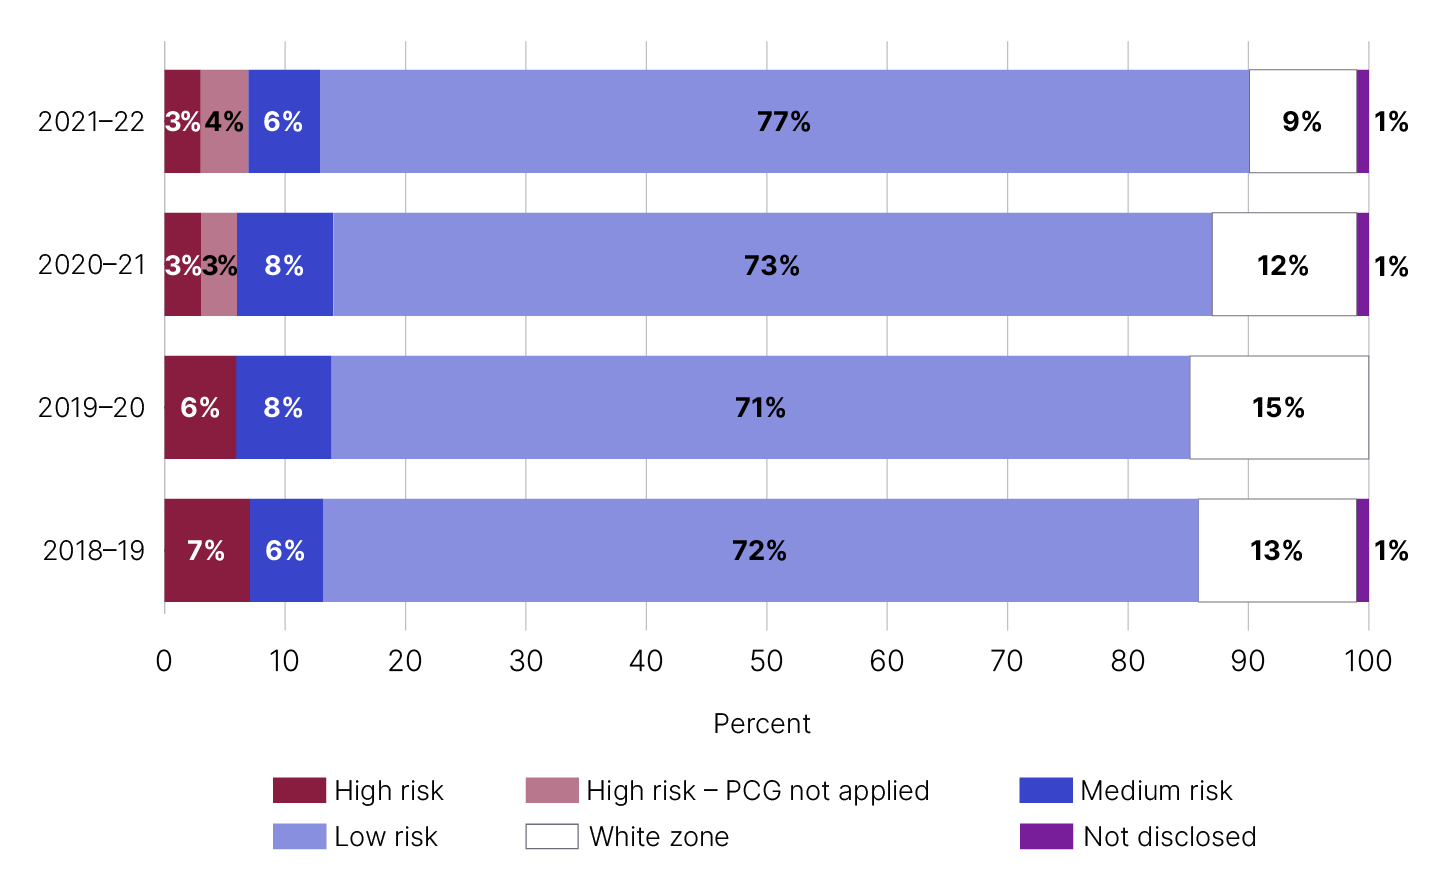 2021-22 results. High risk = 3%. High risk - PCG not applied = 4%. Medium risk = 6%. Low risk = 77%. White zone = 9%. Not disclosed = 1%.  2020-21 results. High risk = 3%. High risk - PCG not applied = 3%. Medium risk = 8%. Low risk = 73%. White zone = 12%. Not disclosed = 1%.  2019-18 results. High risk = 6%. Medium risk = 8%. Low risk = 71%. White zone = 15%.  2018-19 results. High risk = 7%. Medium risk = 6%. Low risk = 72%. White zone = 13%. Not disclosed = 1%.